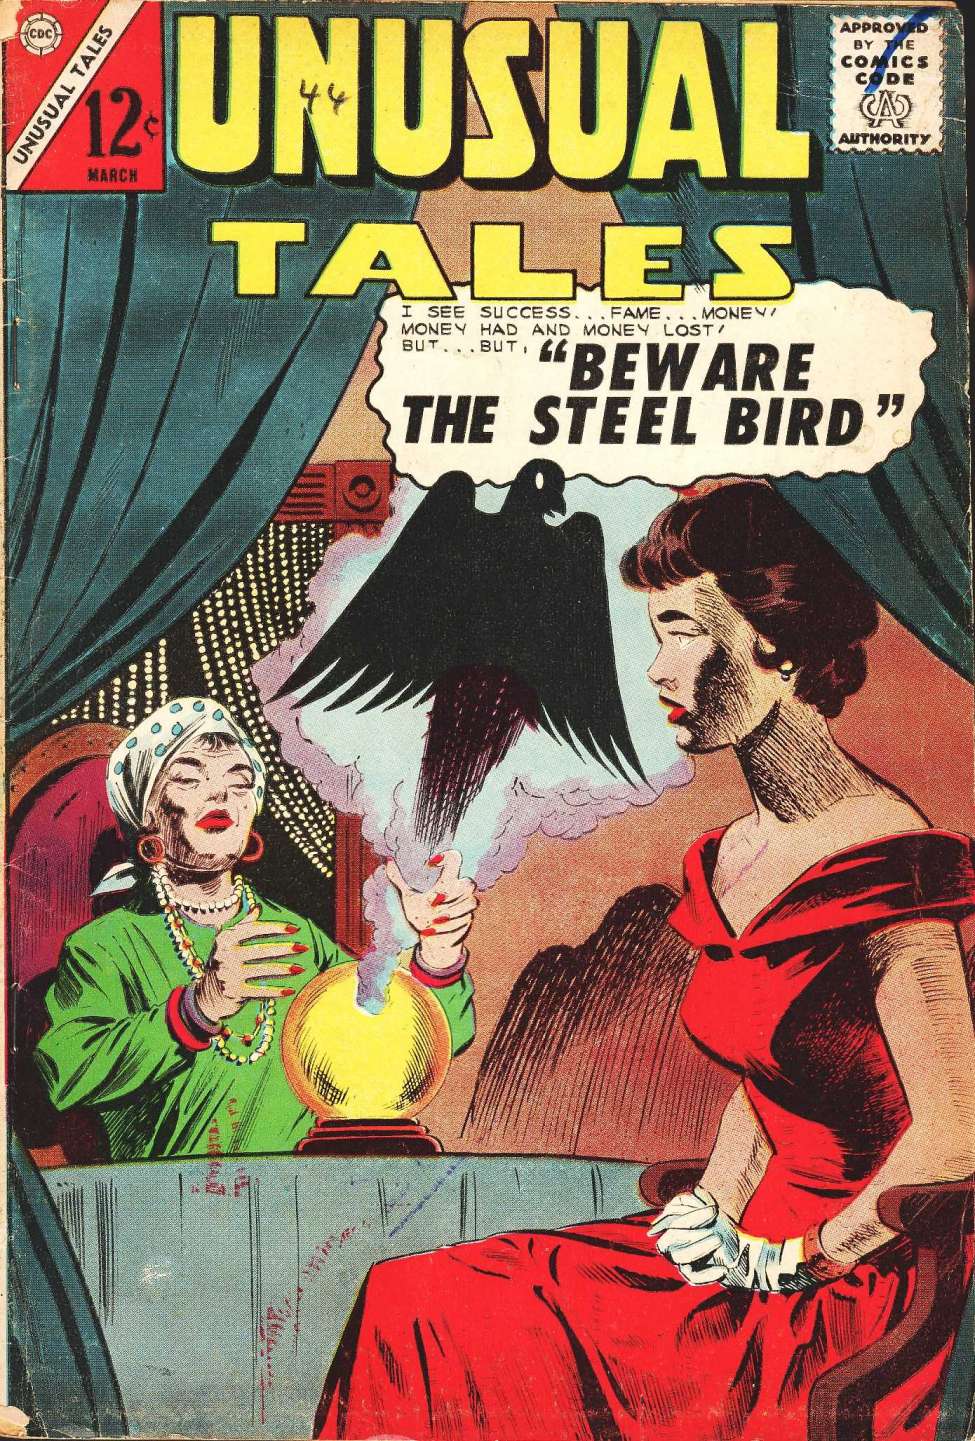 Book Cover For Unusual Tales 44